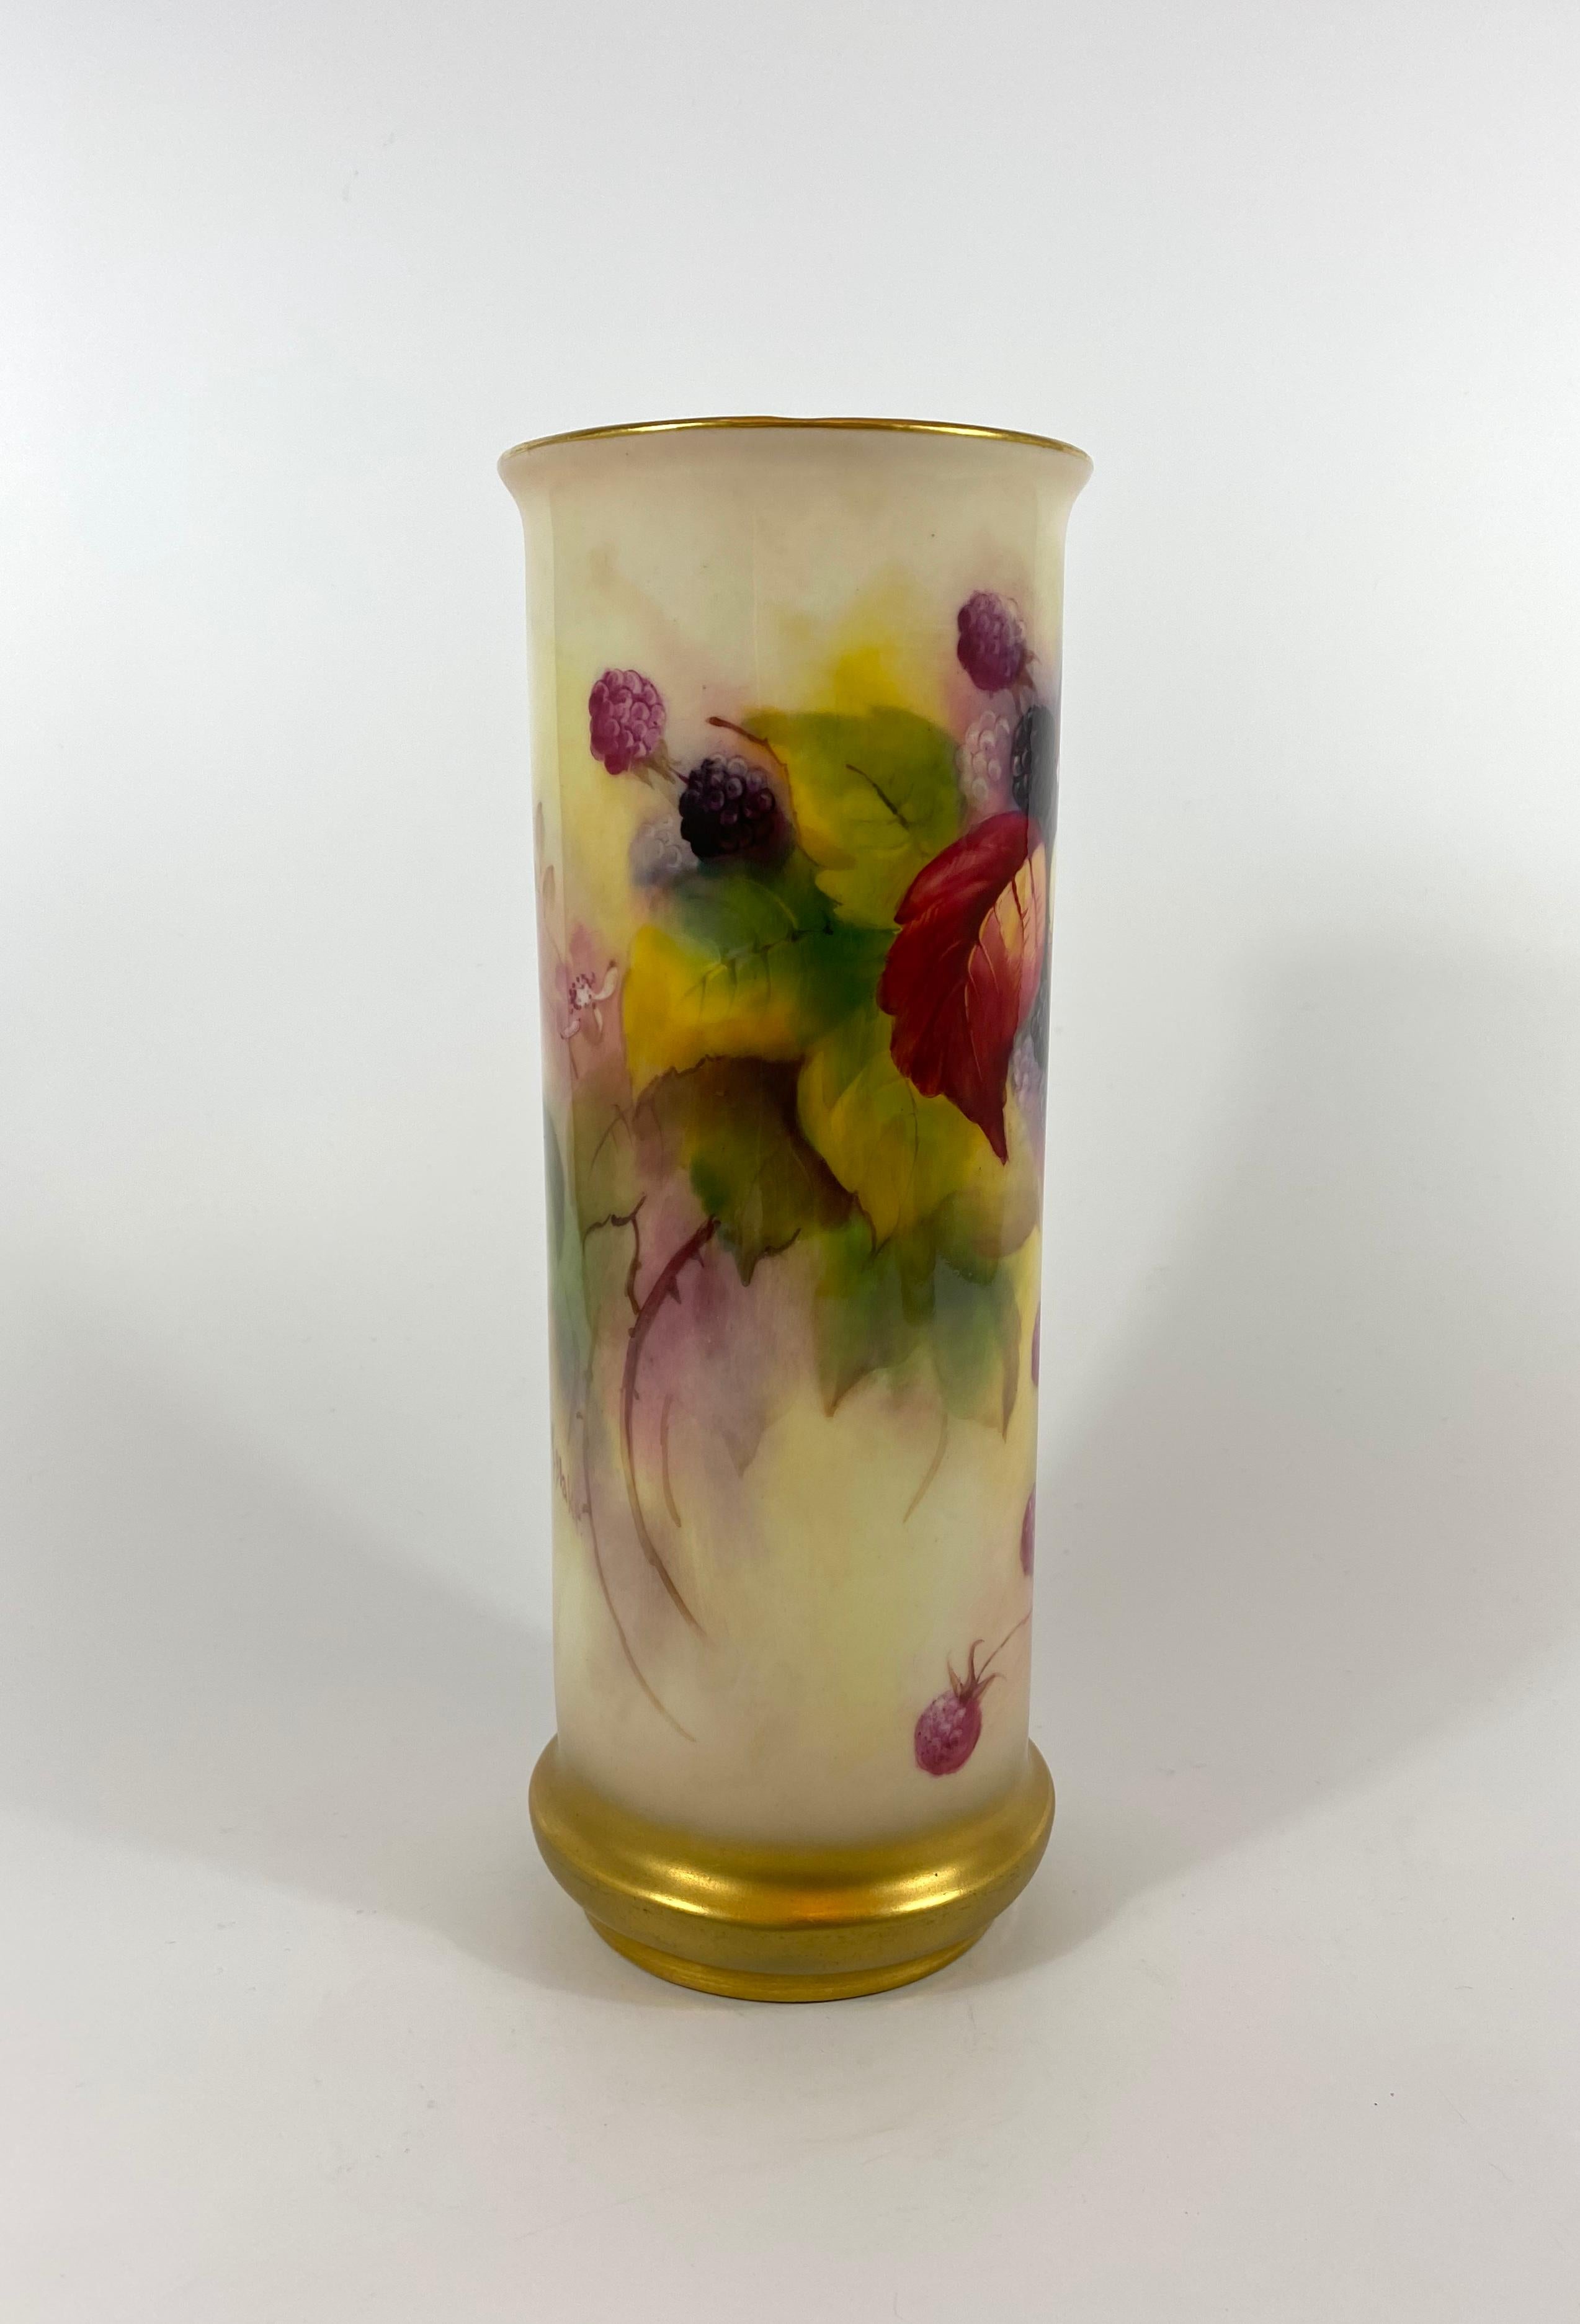 £490.00
Royal Worcester porcelain, a large spill vase, dated 1930. Finely painted by Kitty Blake, with a study of berries and autumn leaves. Gilded to the rim, and foot rim.
Signed K. Blake.
Printed puce and date code for 1930 to the